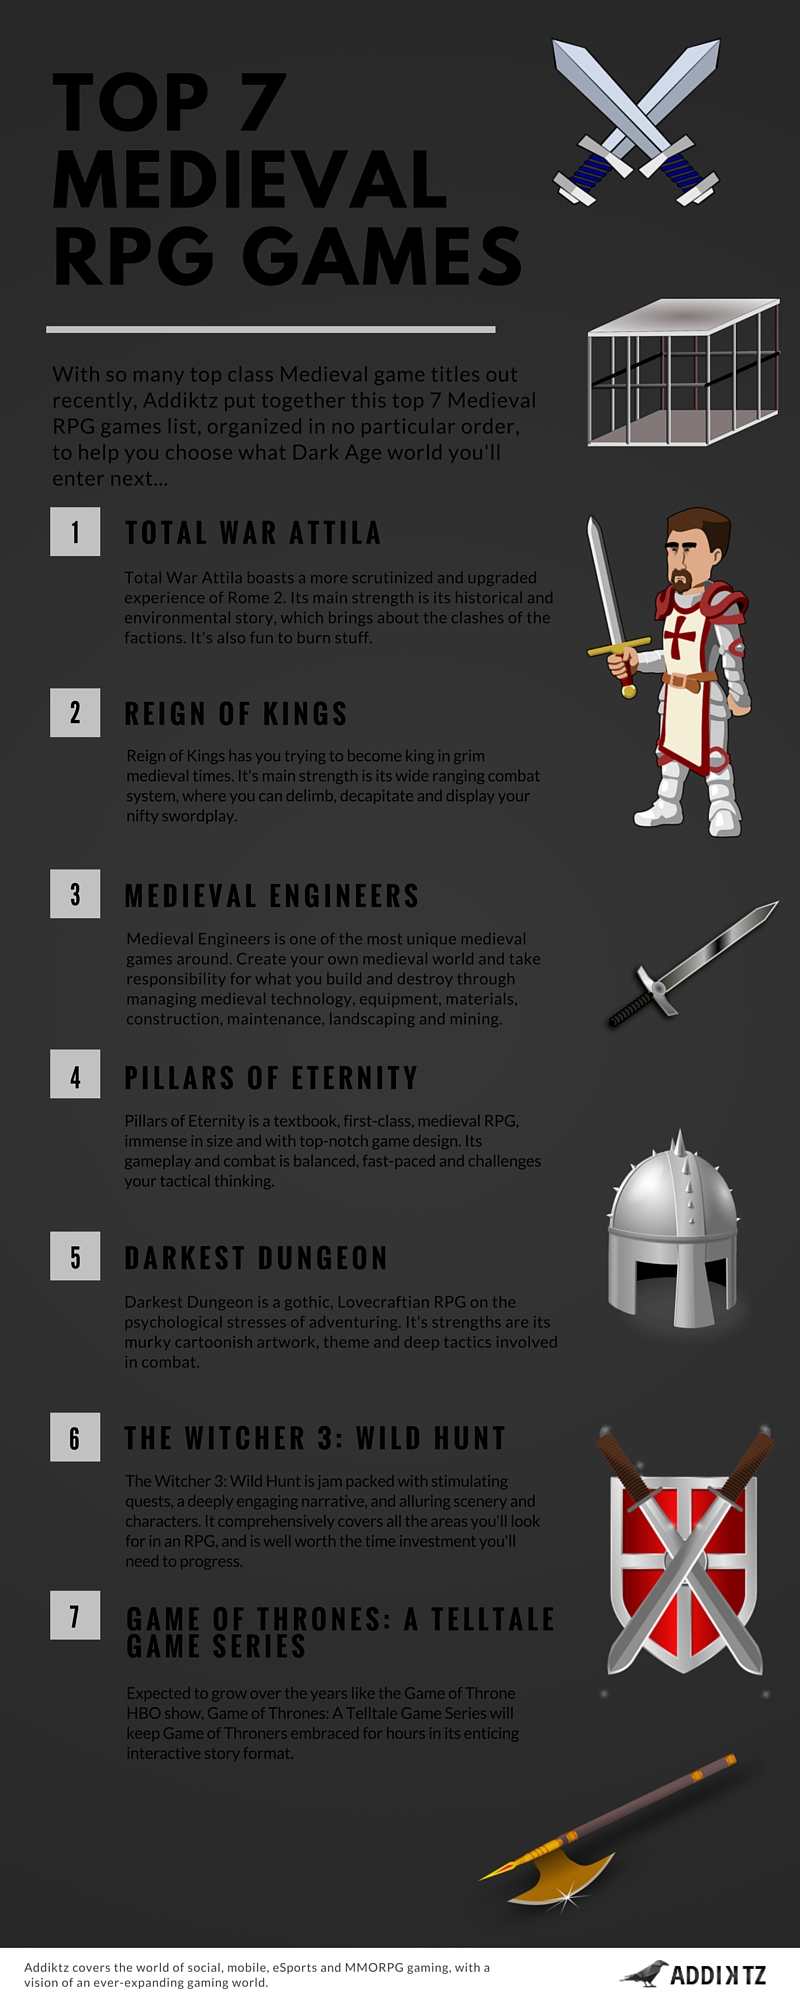 Top 7 Medieval RPG Games [Infographic]